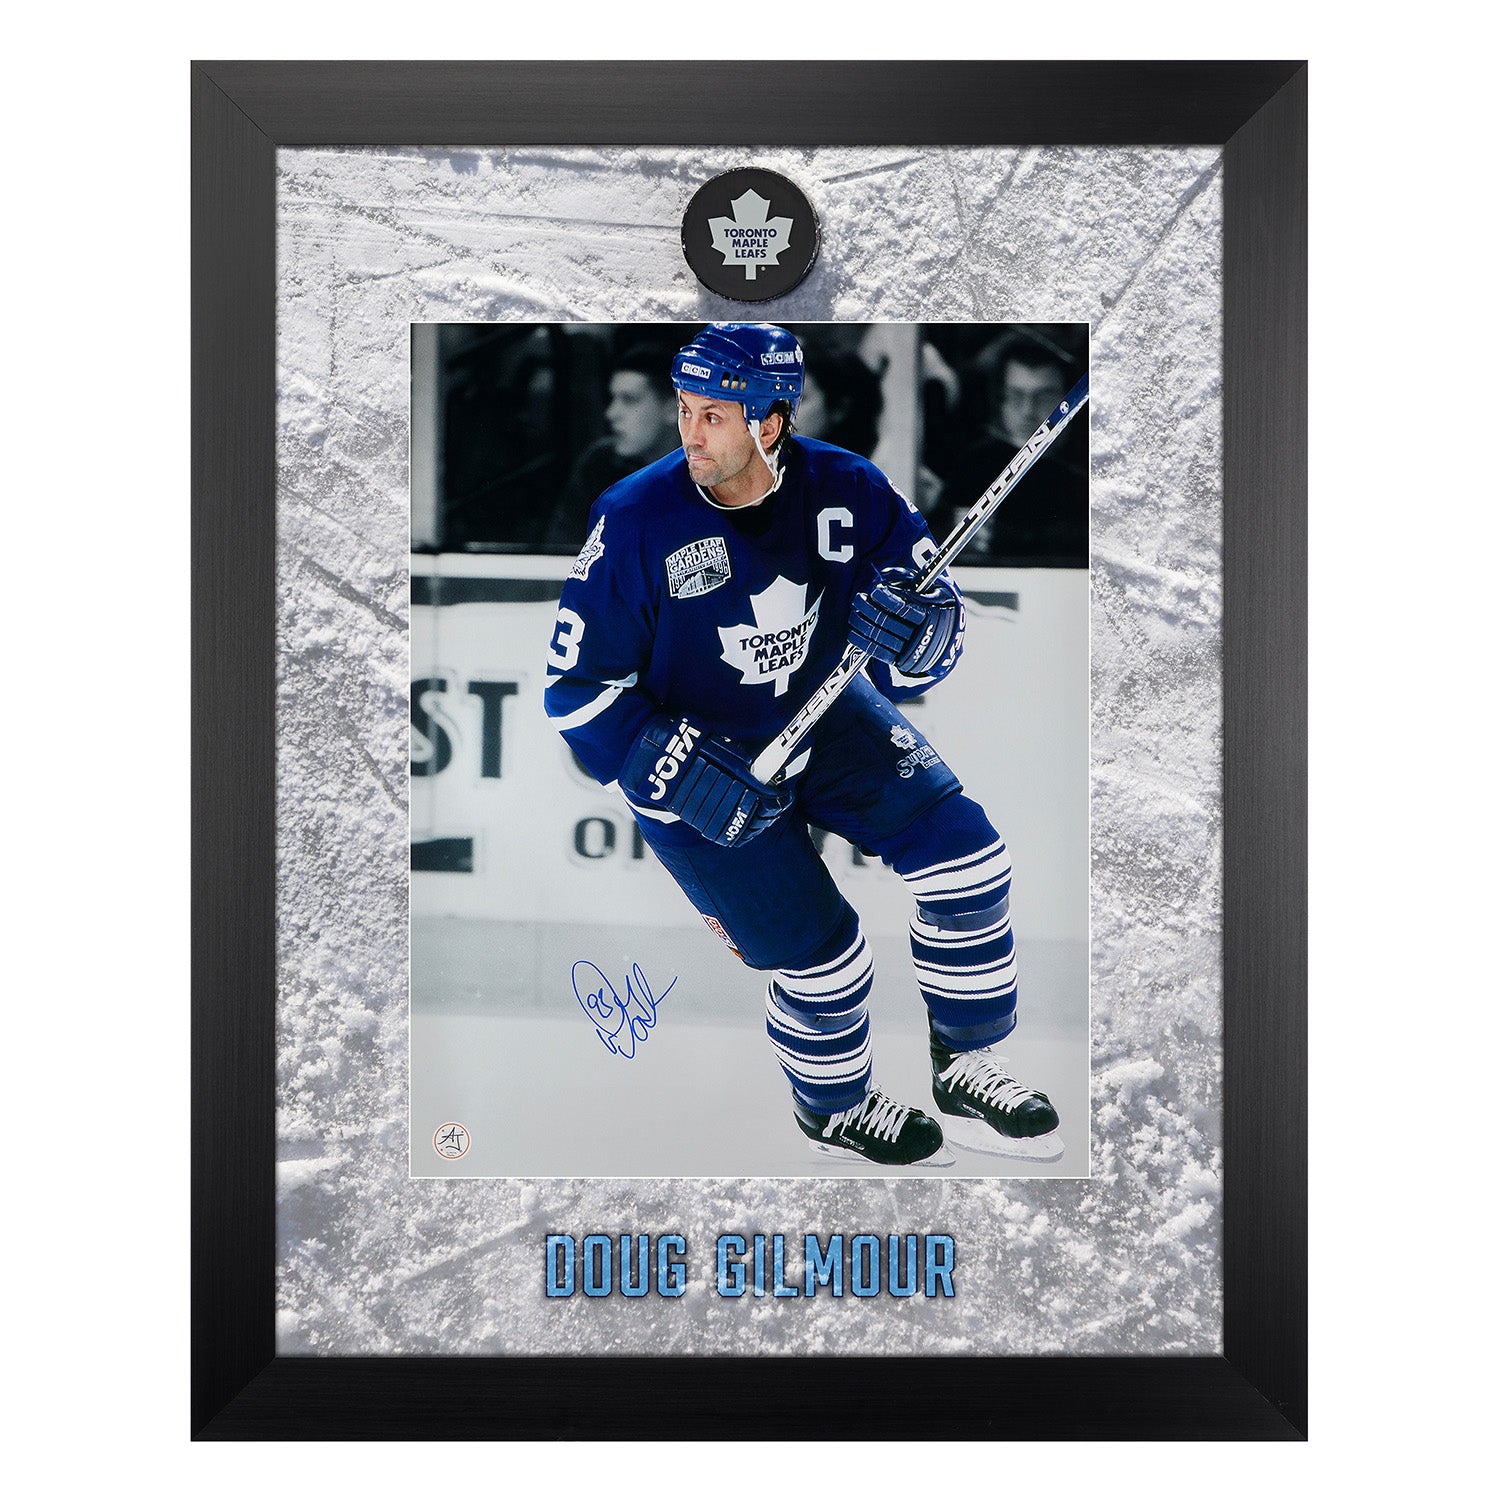 Doug Gilmour Signed Toronto Maple Leafs Etched Ice 26x32 Frame